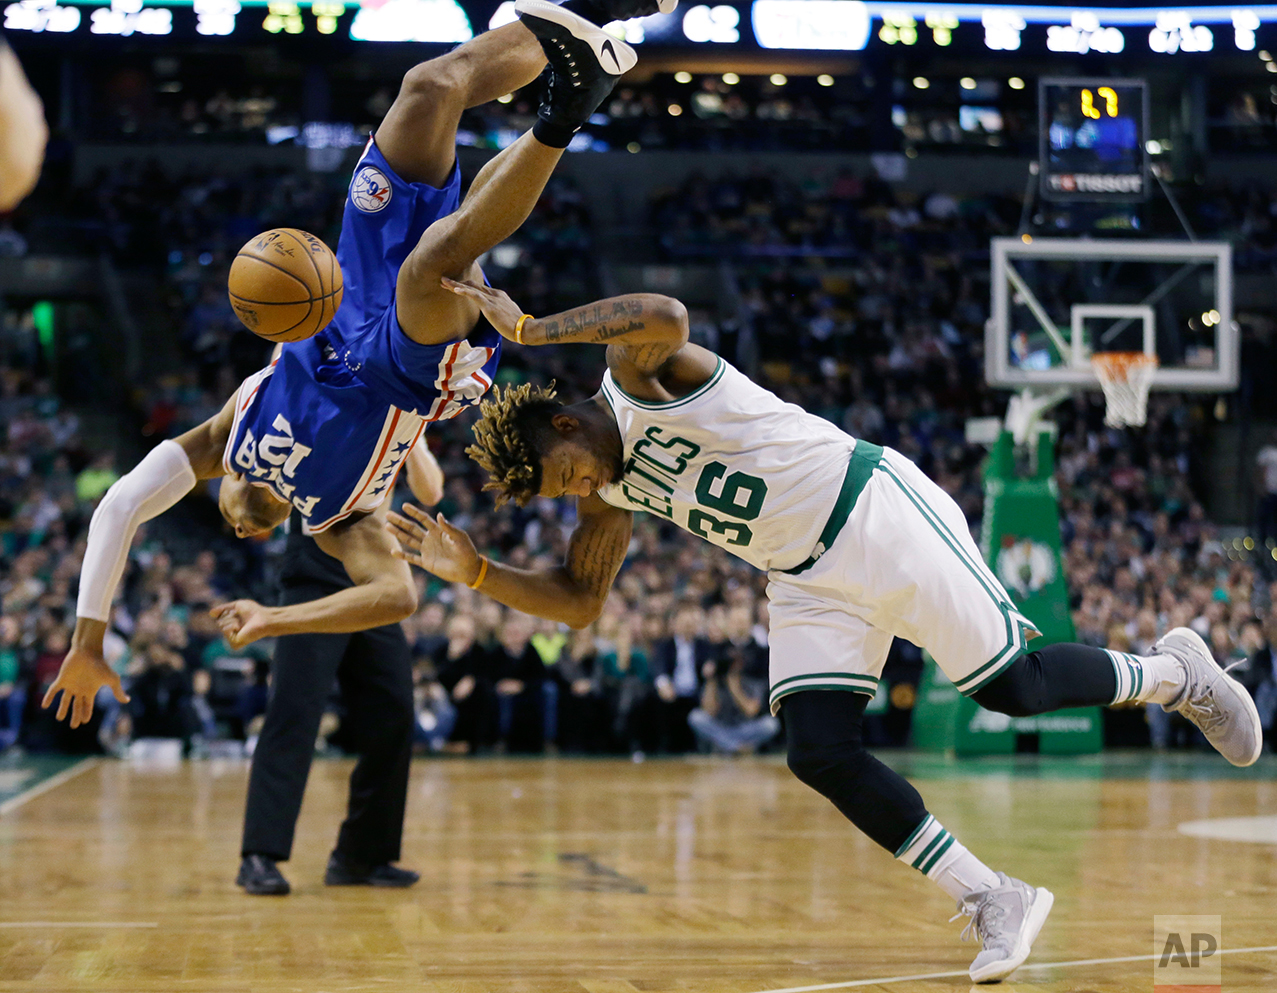  Philadelphia 76ers guard Gerald Henderson (12) falls as he tries to block a shot by Boston Celtics guard Marcus Smart (36) in the second quarter of an NBA basketball game, Friday, Jan. 6, 2017, in Boston. (AP Photo/Elise Amendola) 